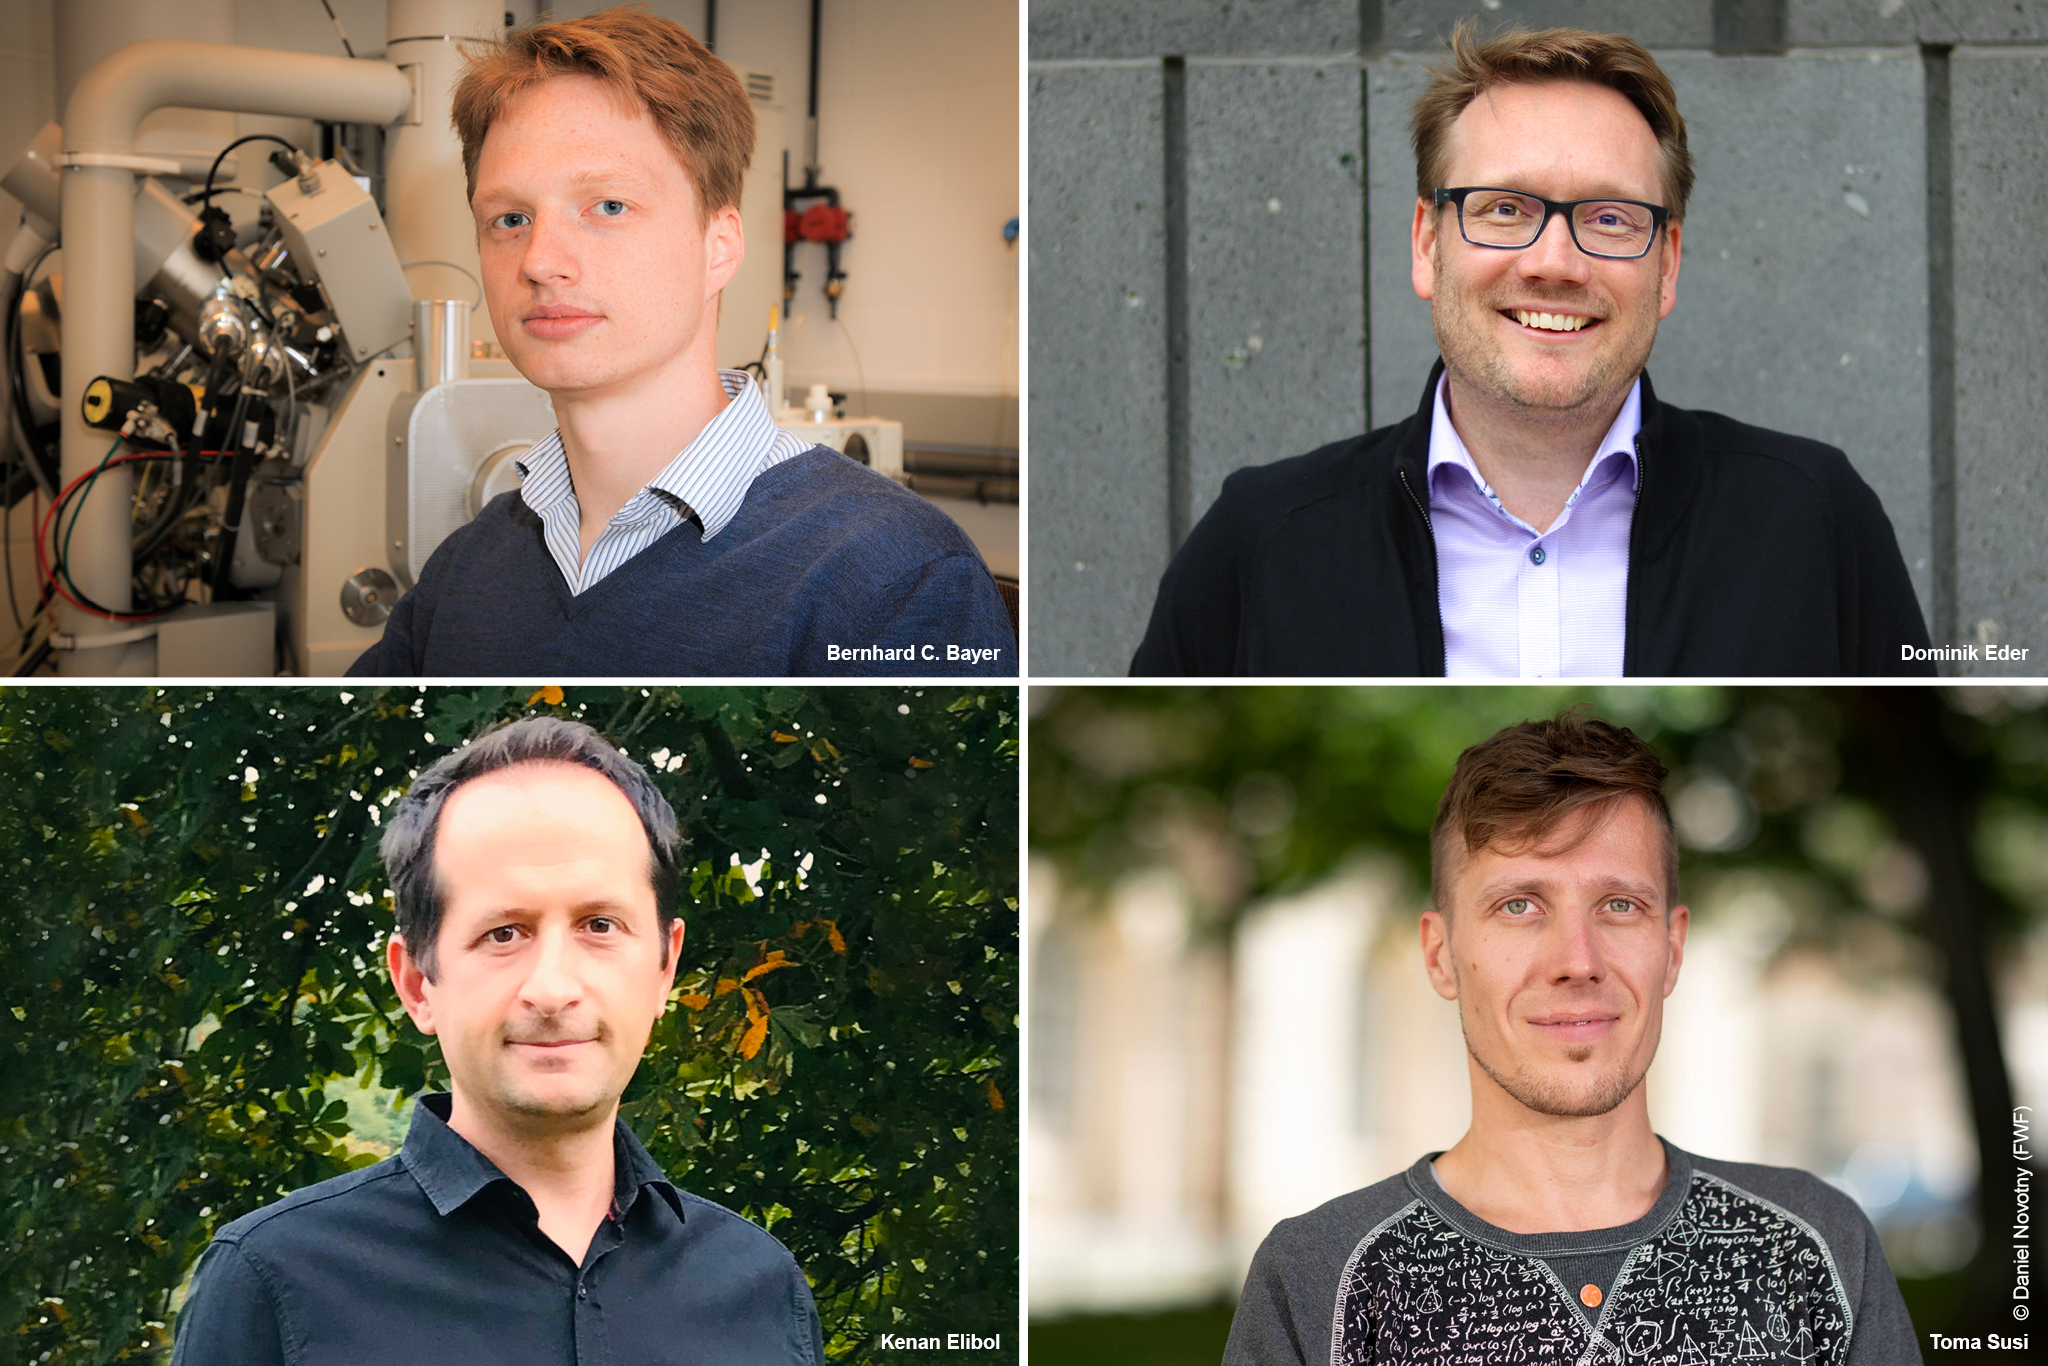 The research team, consisting of four scientists. Representation in portraits.